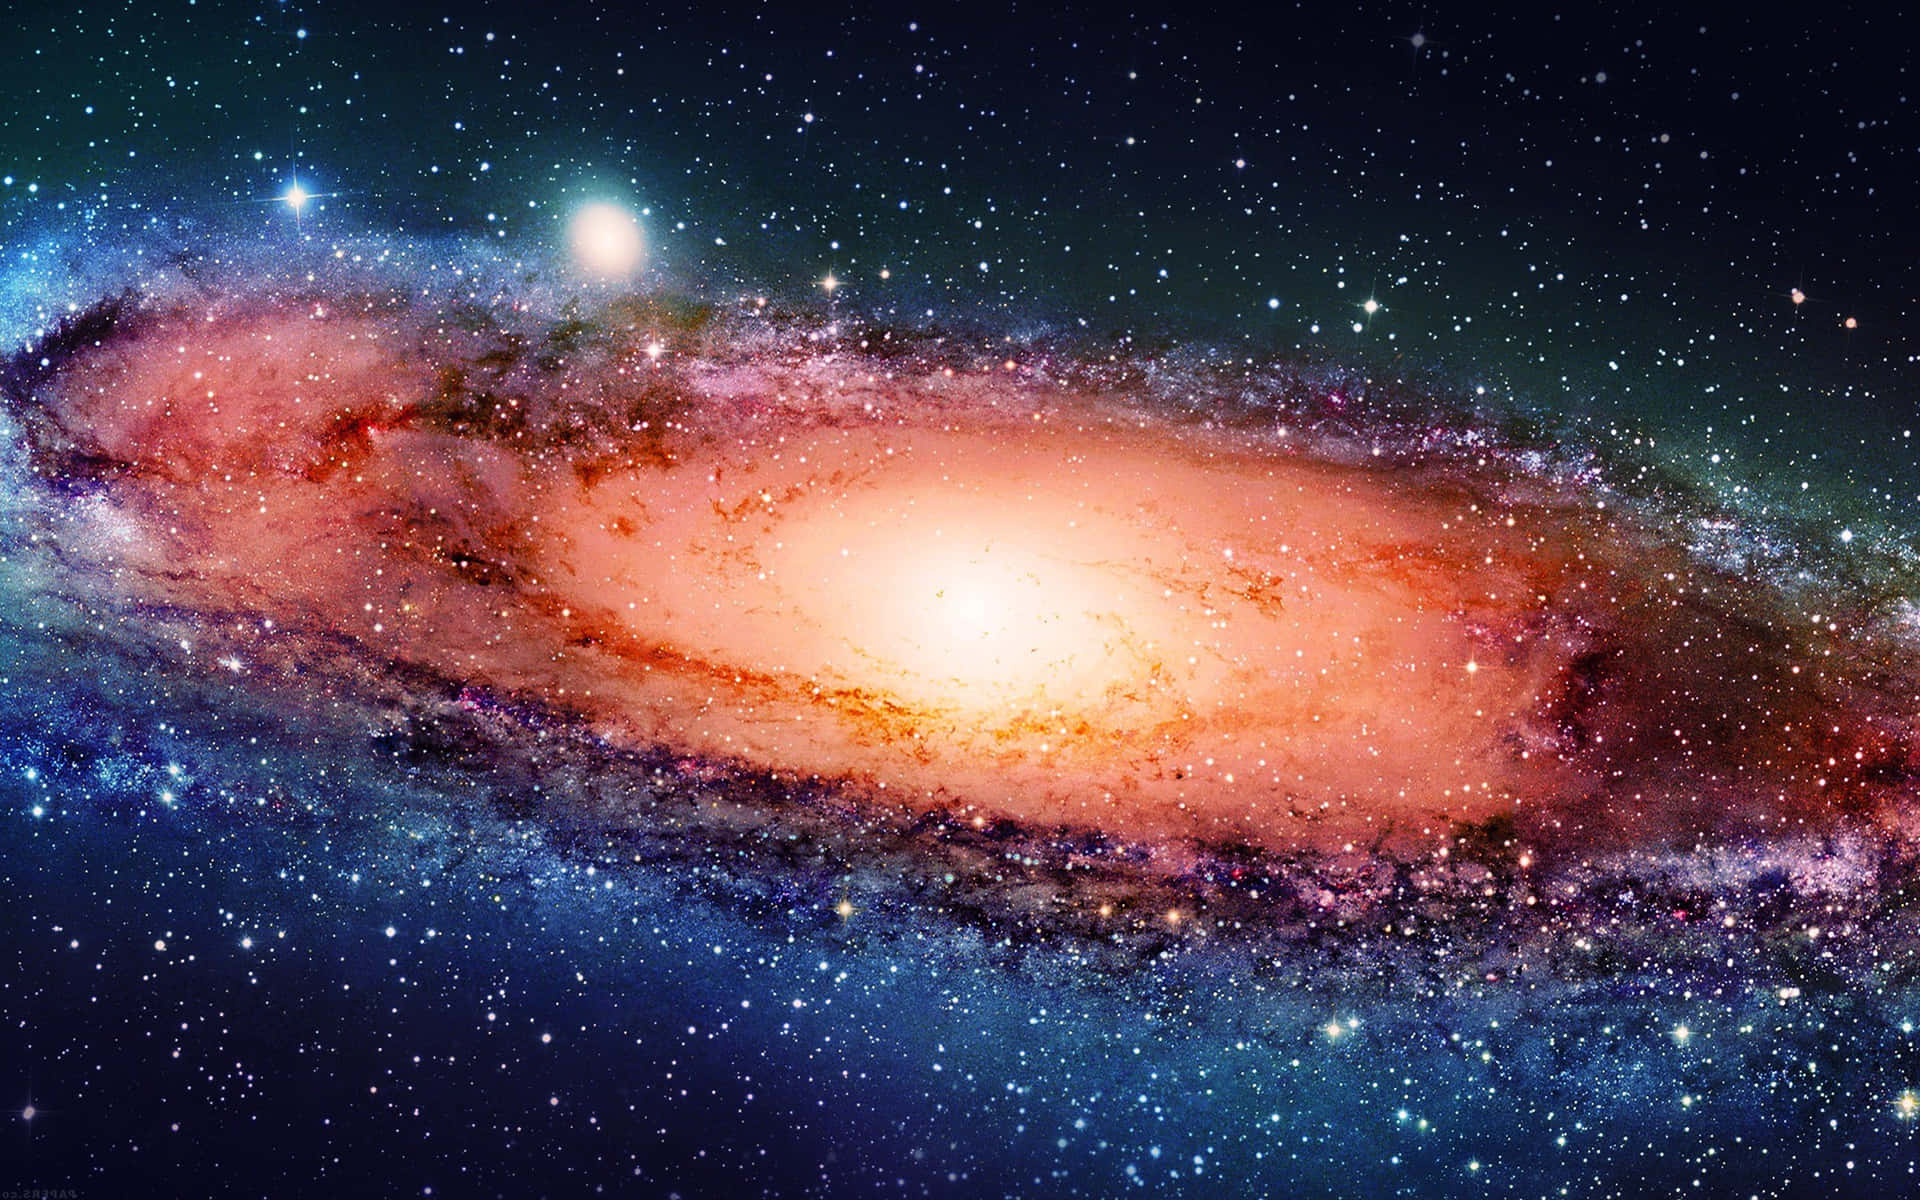 Image  "Beautiful Dazzling View of a Galaxy Full of Planets" Wallpaper